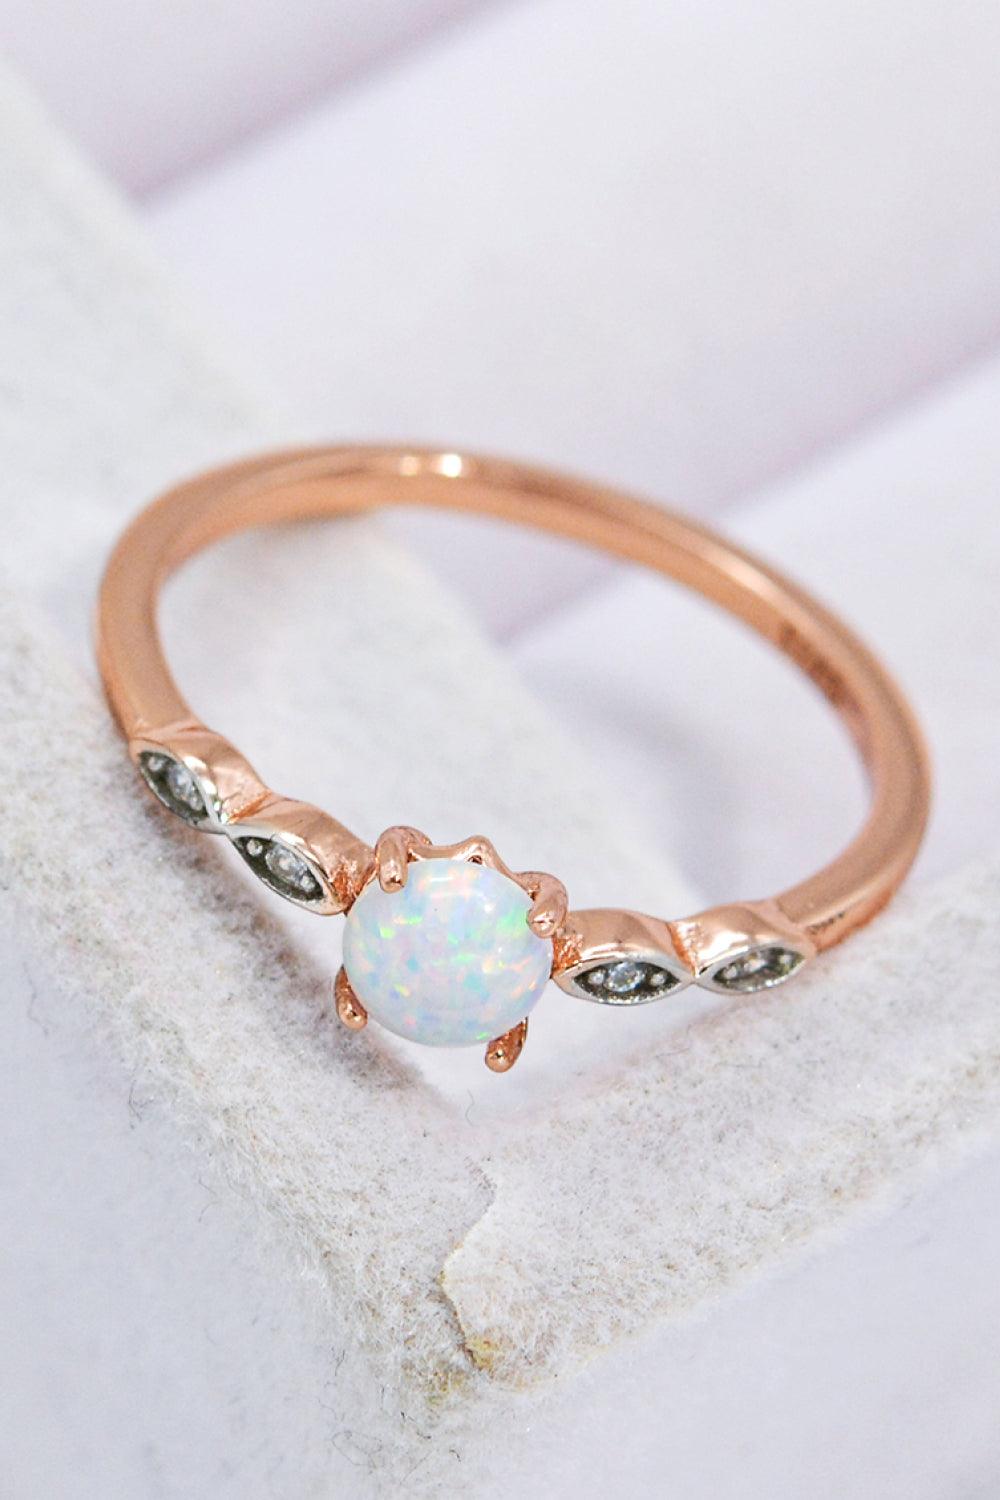 Opal Contrast Platinum-Plated Ring - Flyclothing LLC